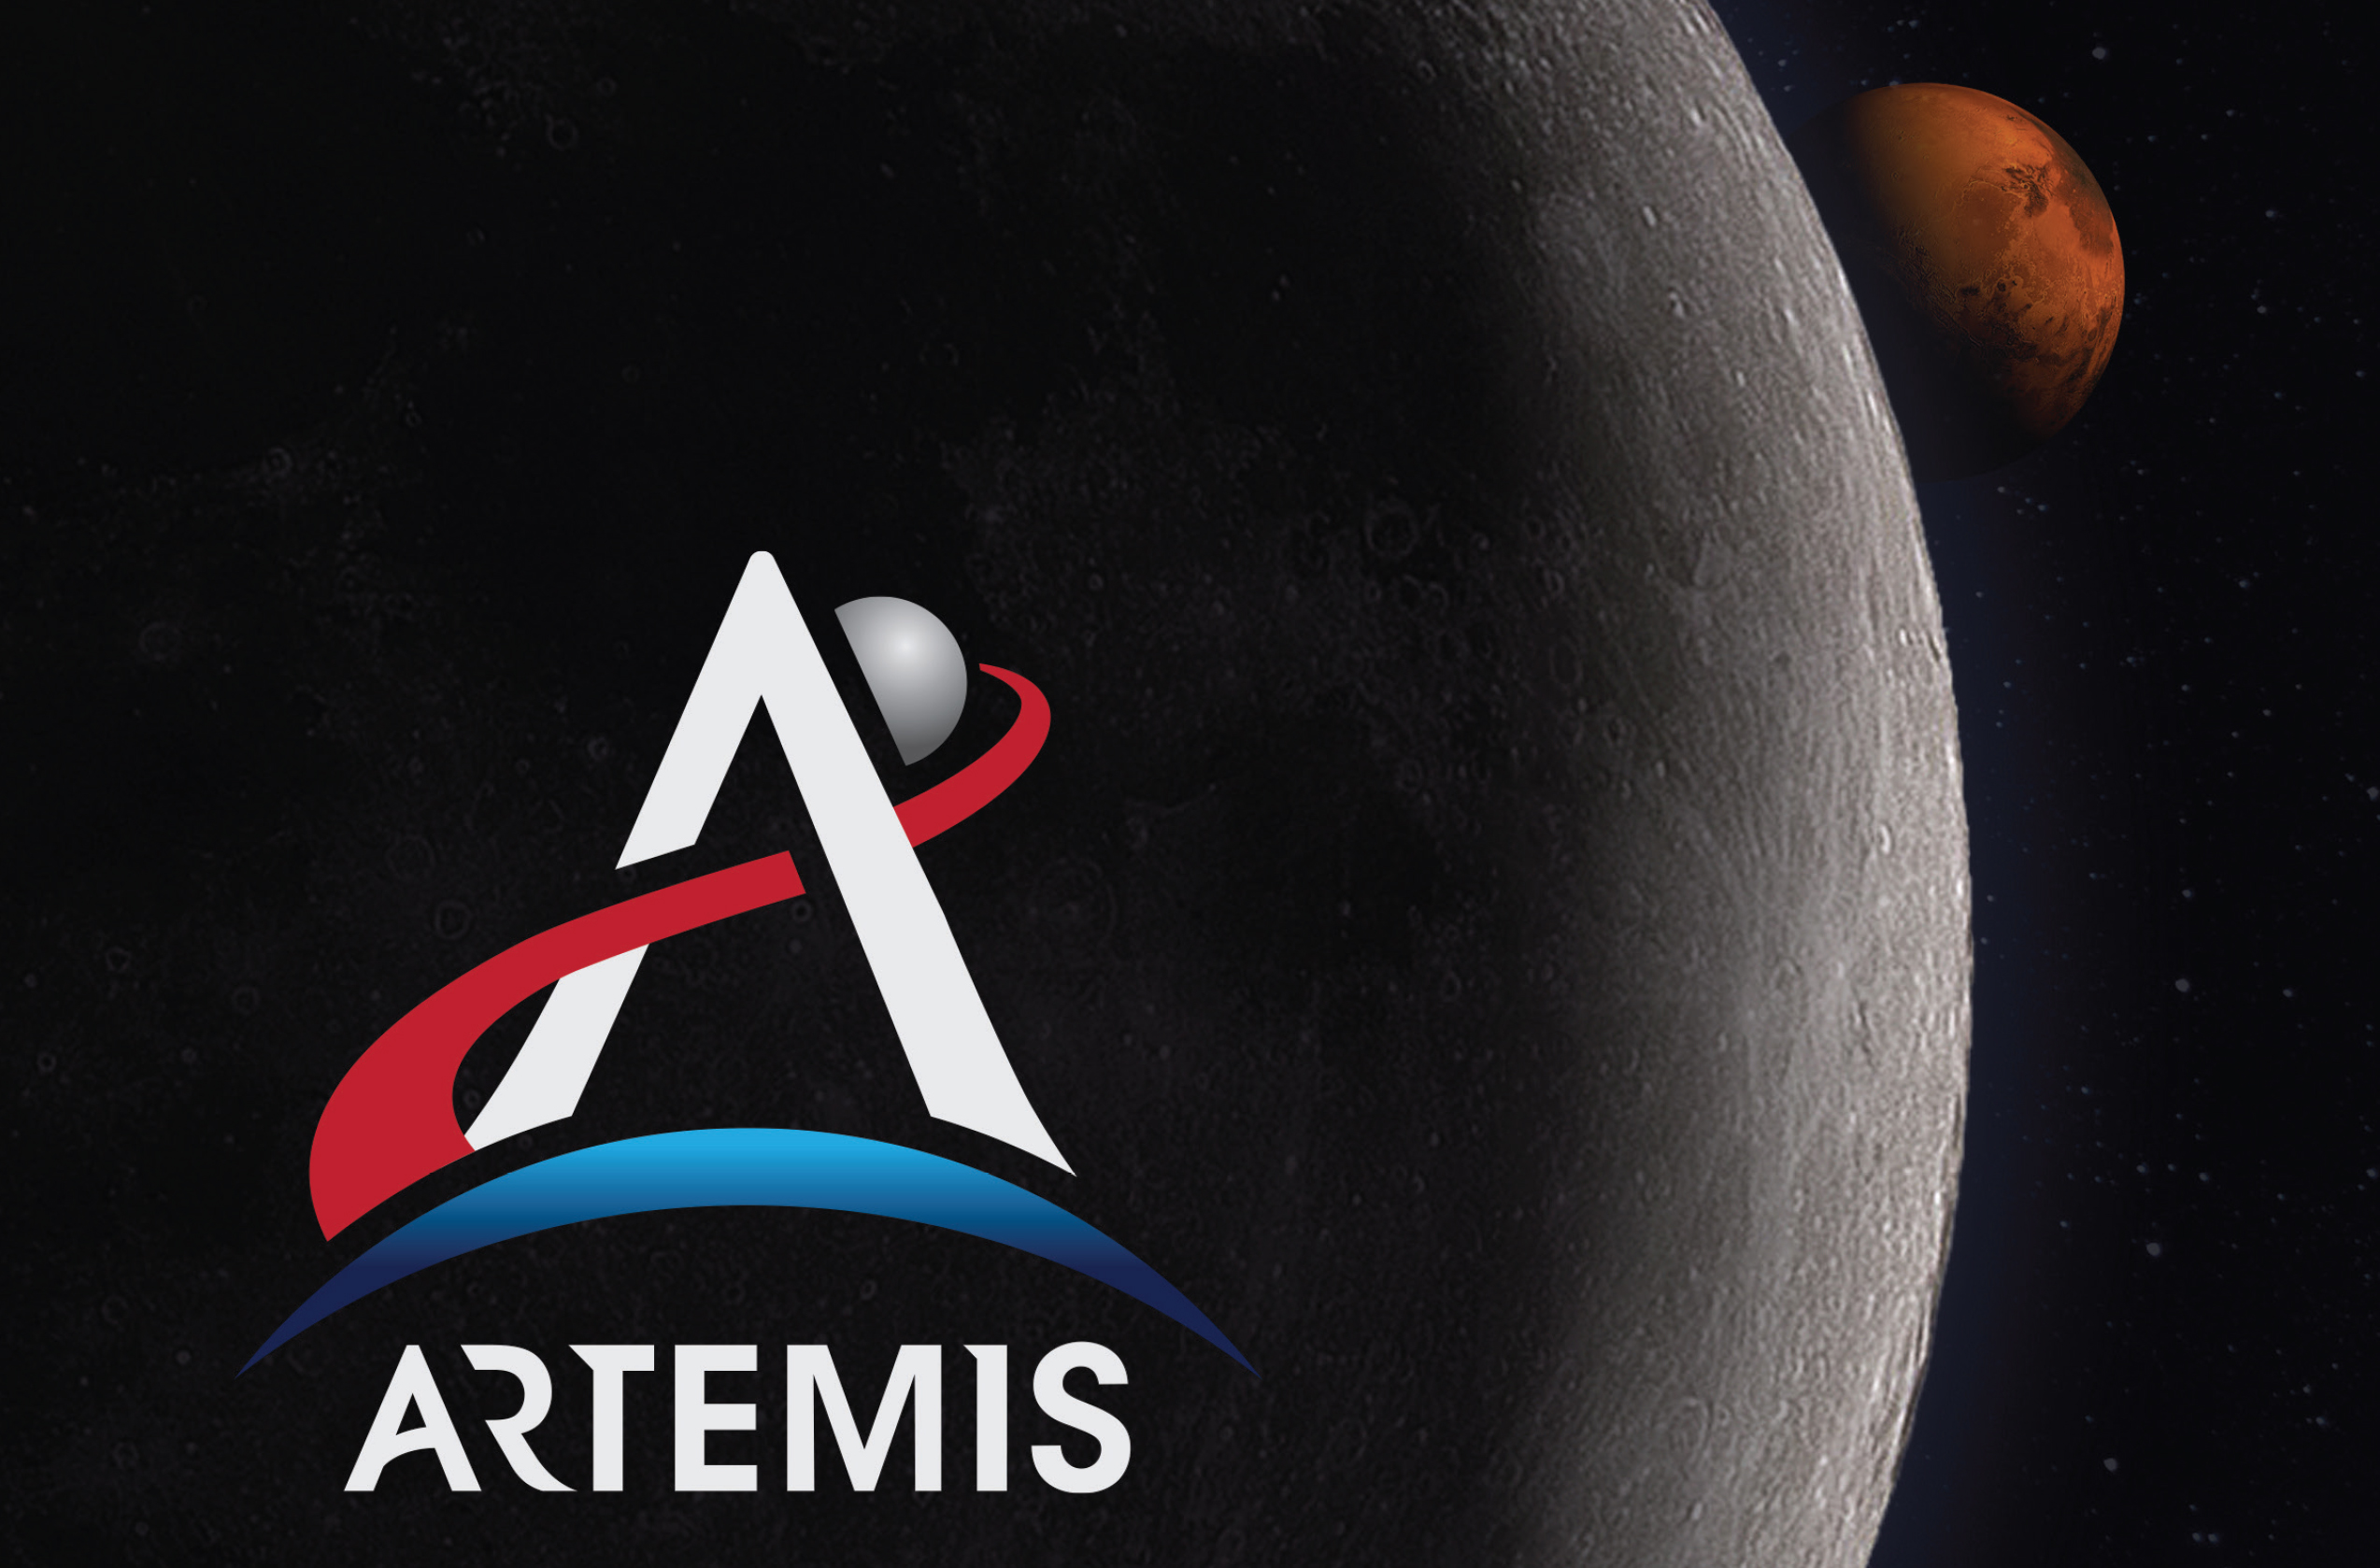 Link to Space.com: Artemis astronauts will carry plants to the moon in 2026 by Mike Wall 